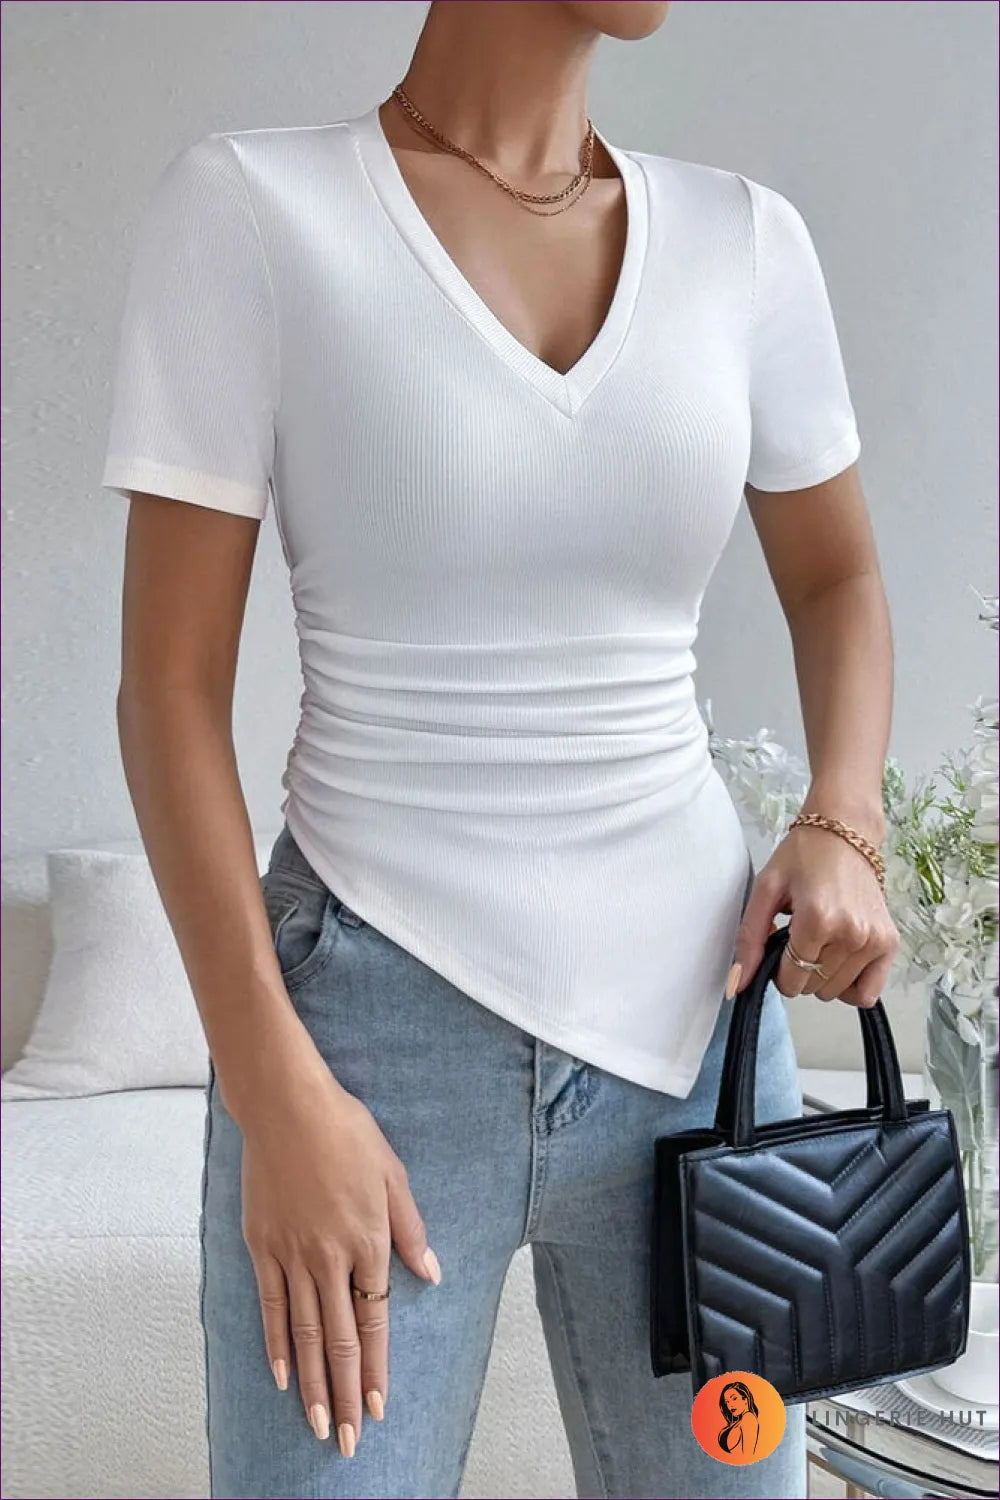 Enhance Your Elegance With Our Sexy V-neck Slim Top. It’s More Than An Outfit; It’s a Confidence Boost.